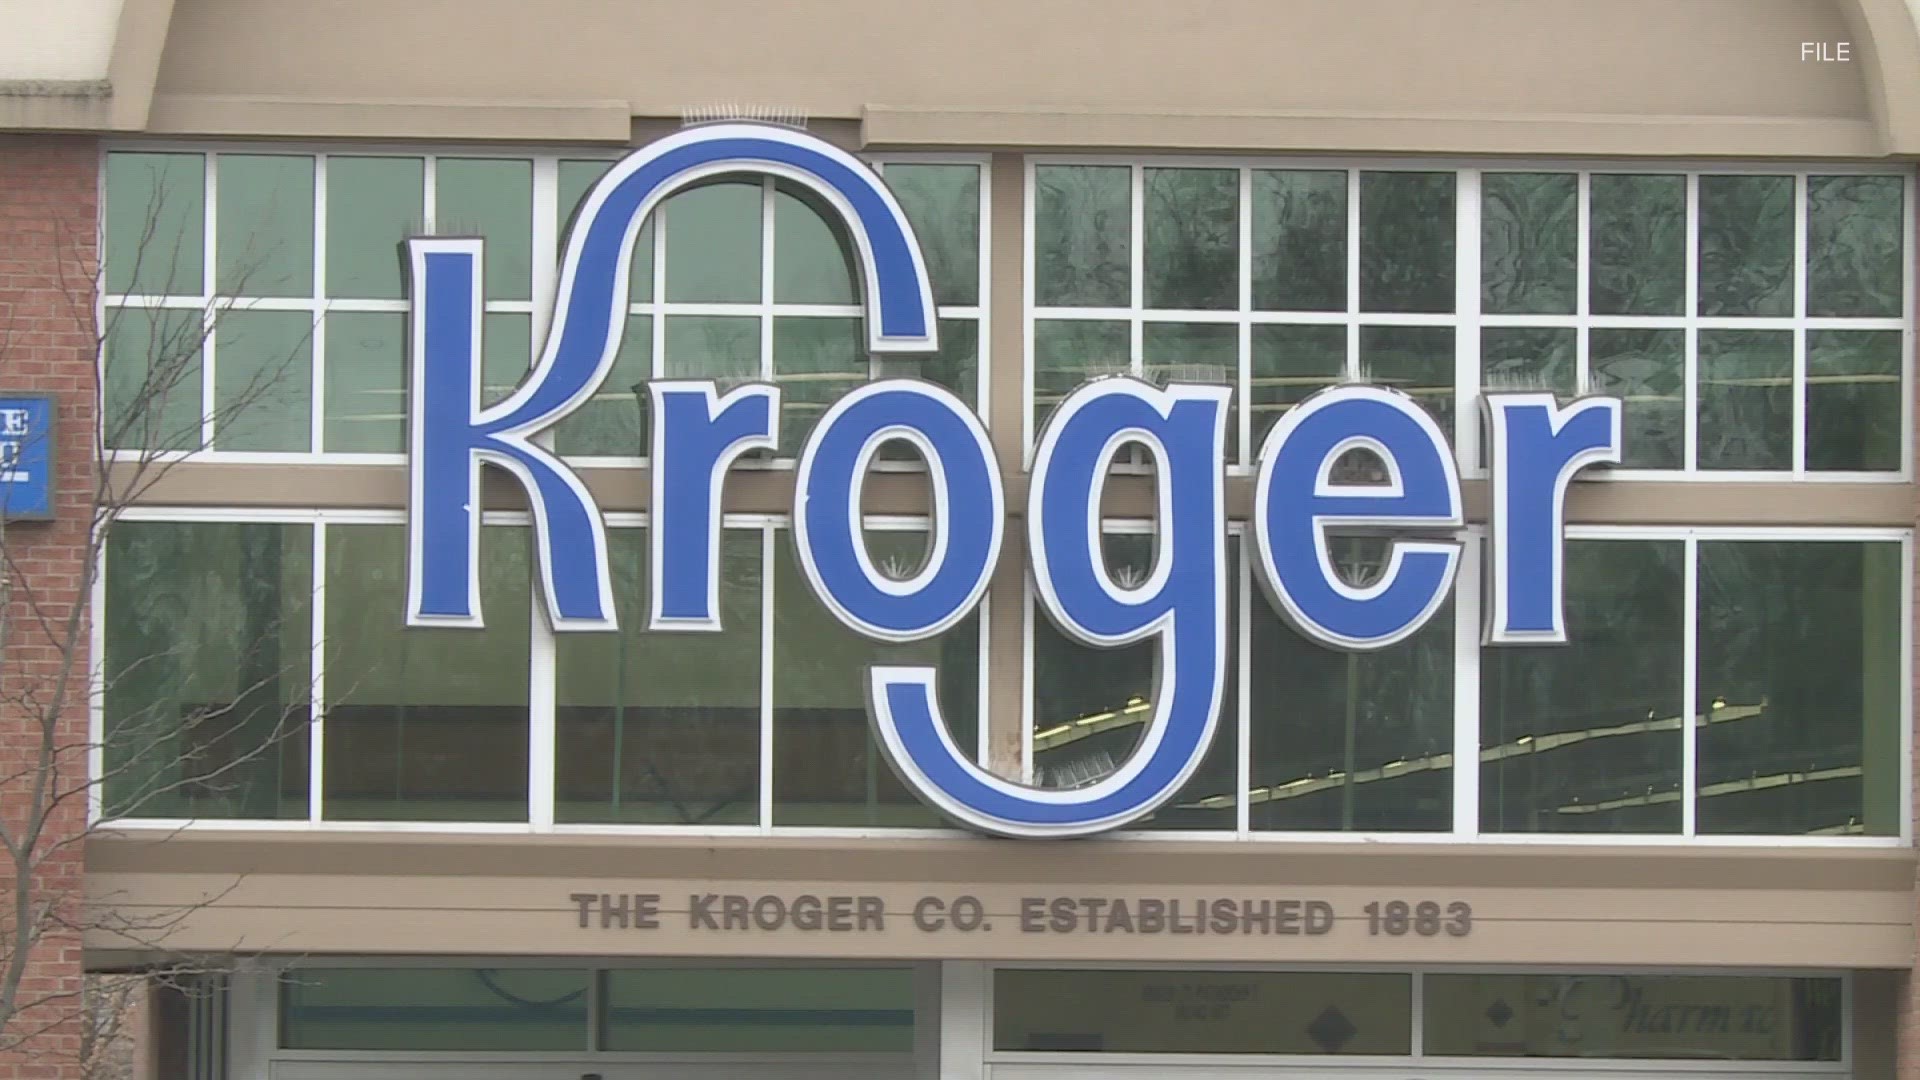 The proposed Kroger location would be built across the street from where Publix plans to open its second in Louisville in 2024.